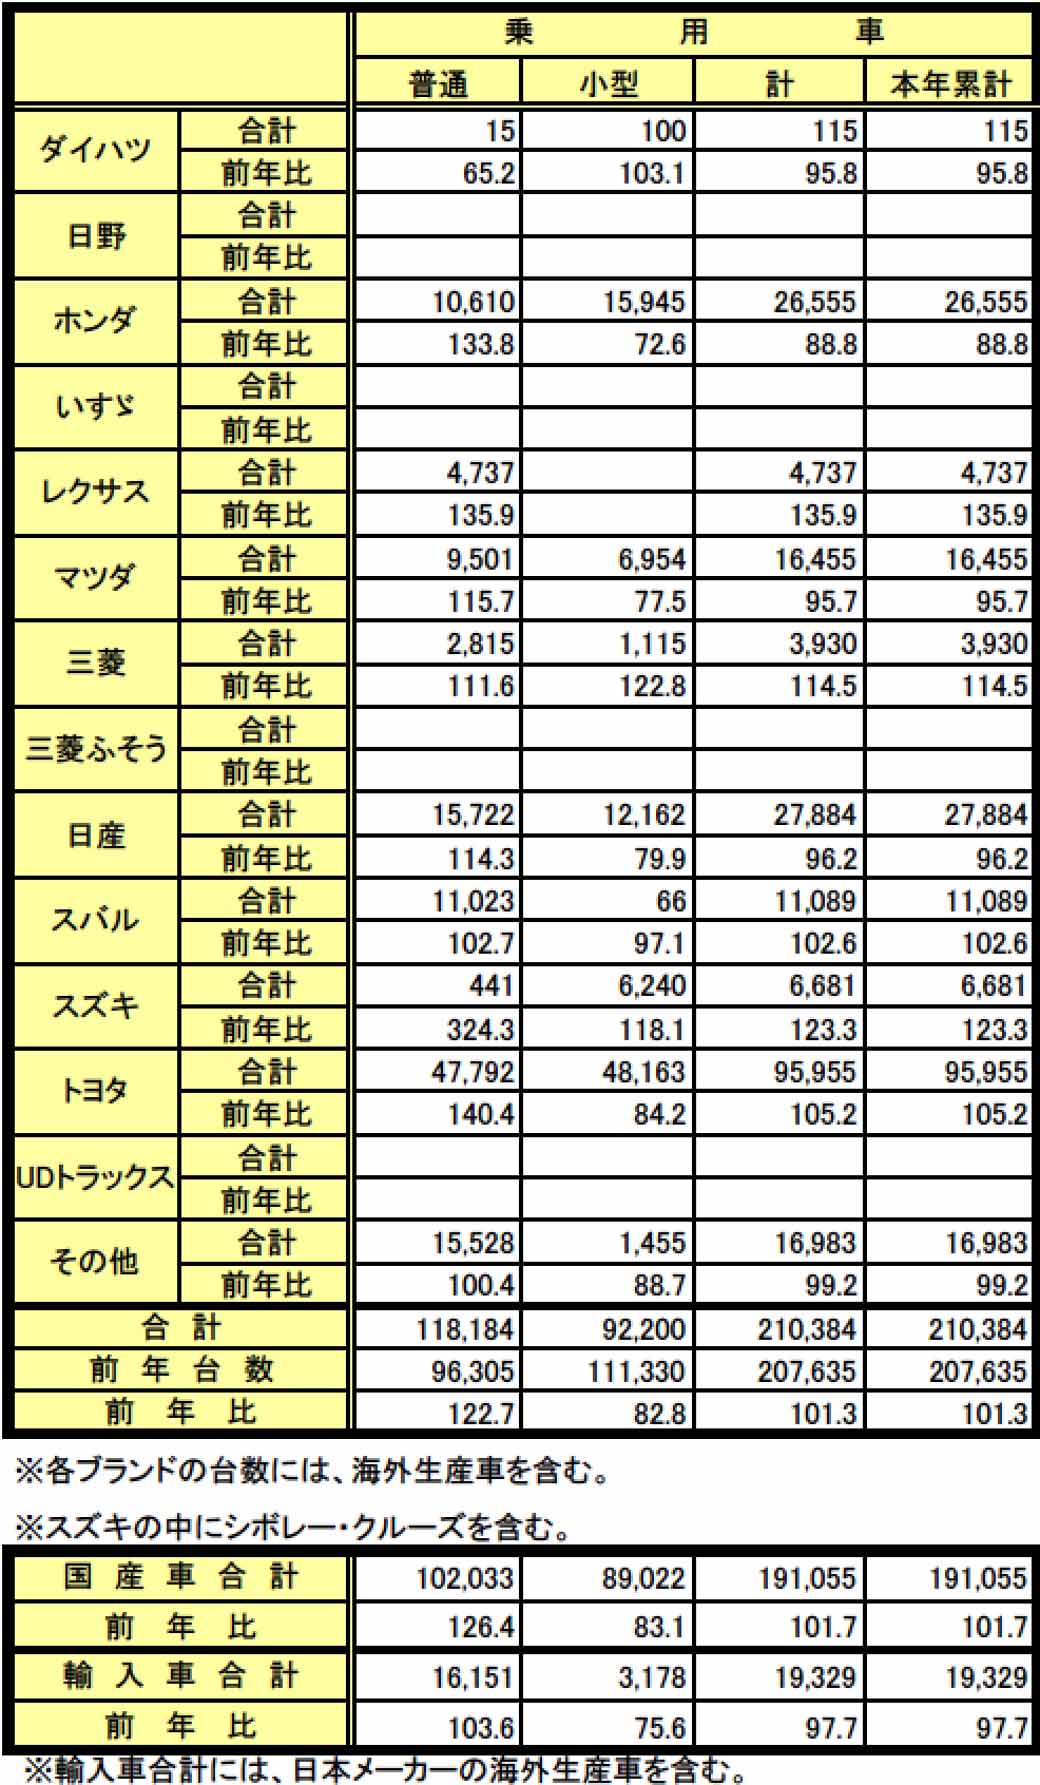 jihanren-announced-the-new-car-sales-in-january-4-consecutive-months-of-positive-numeric-value20160202-1